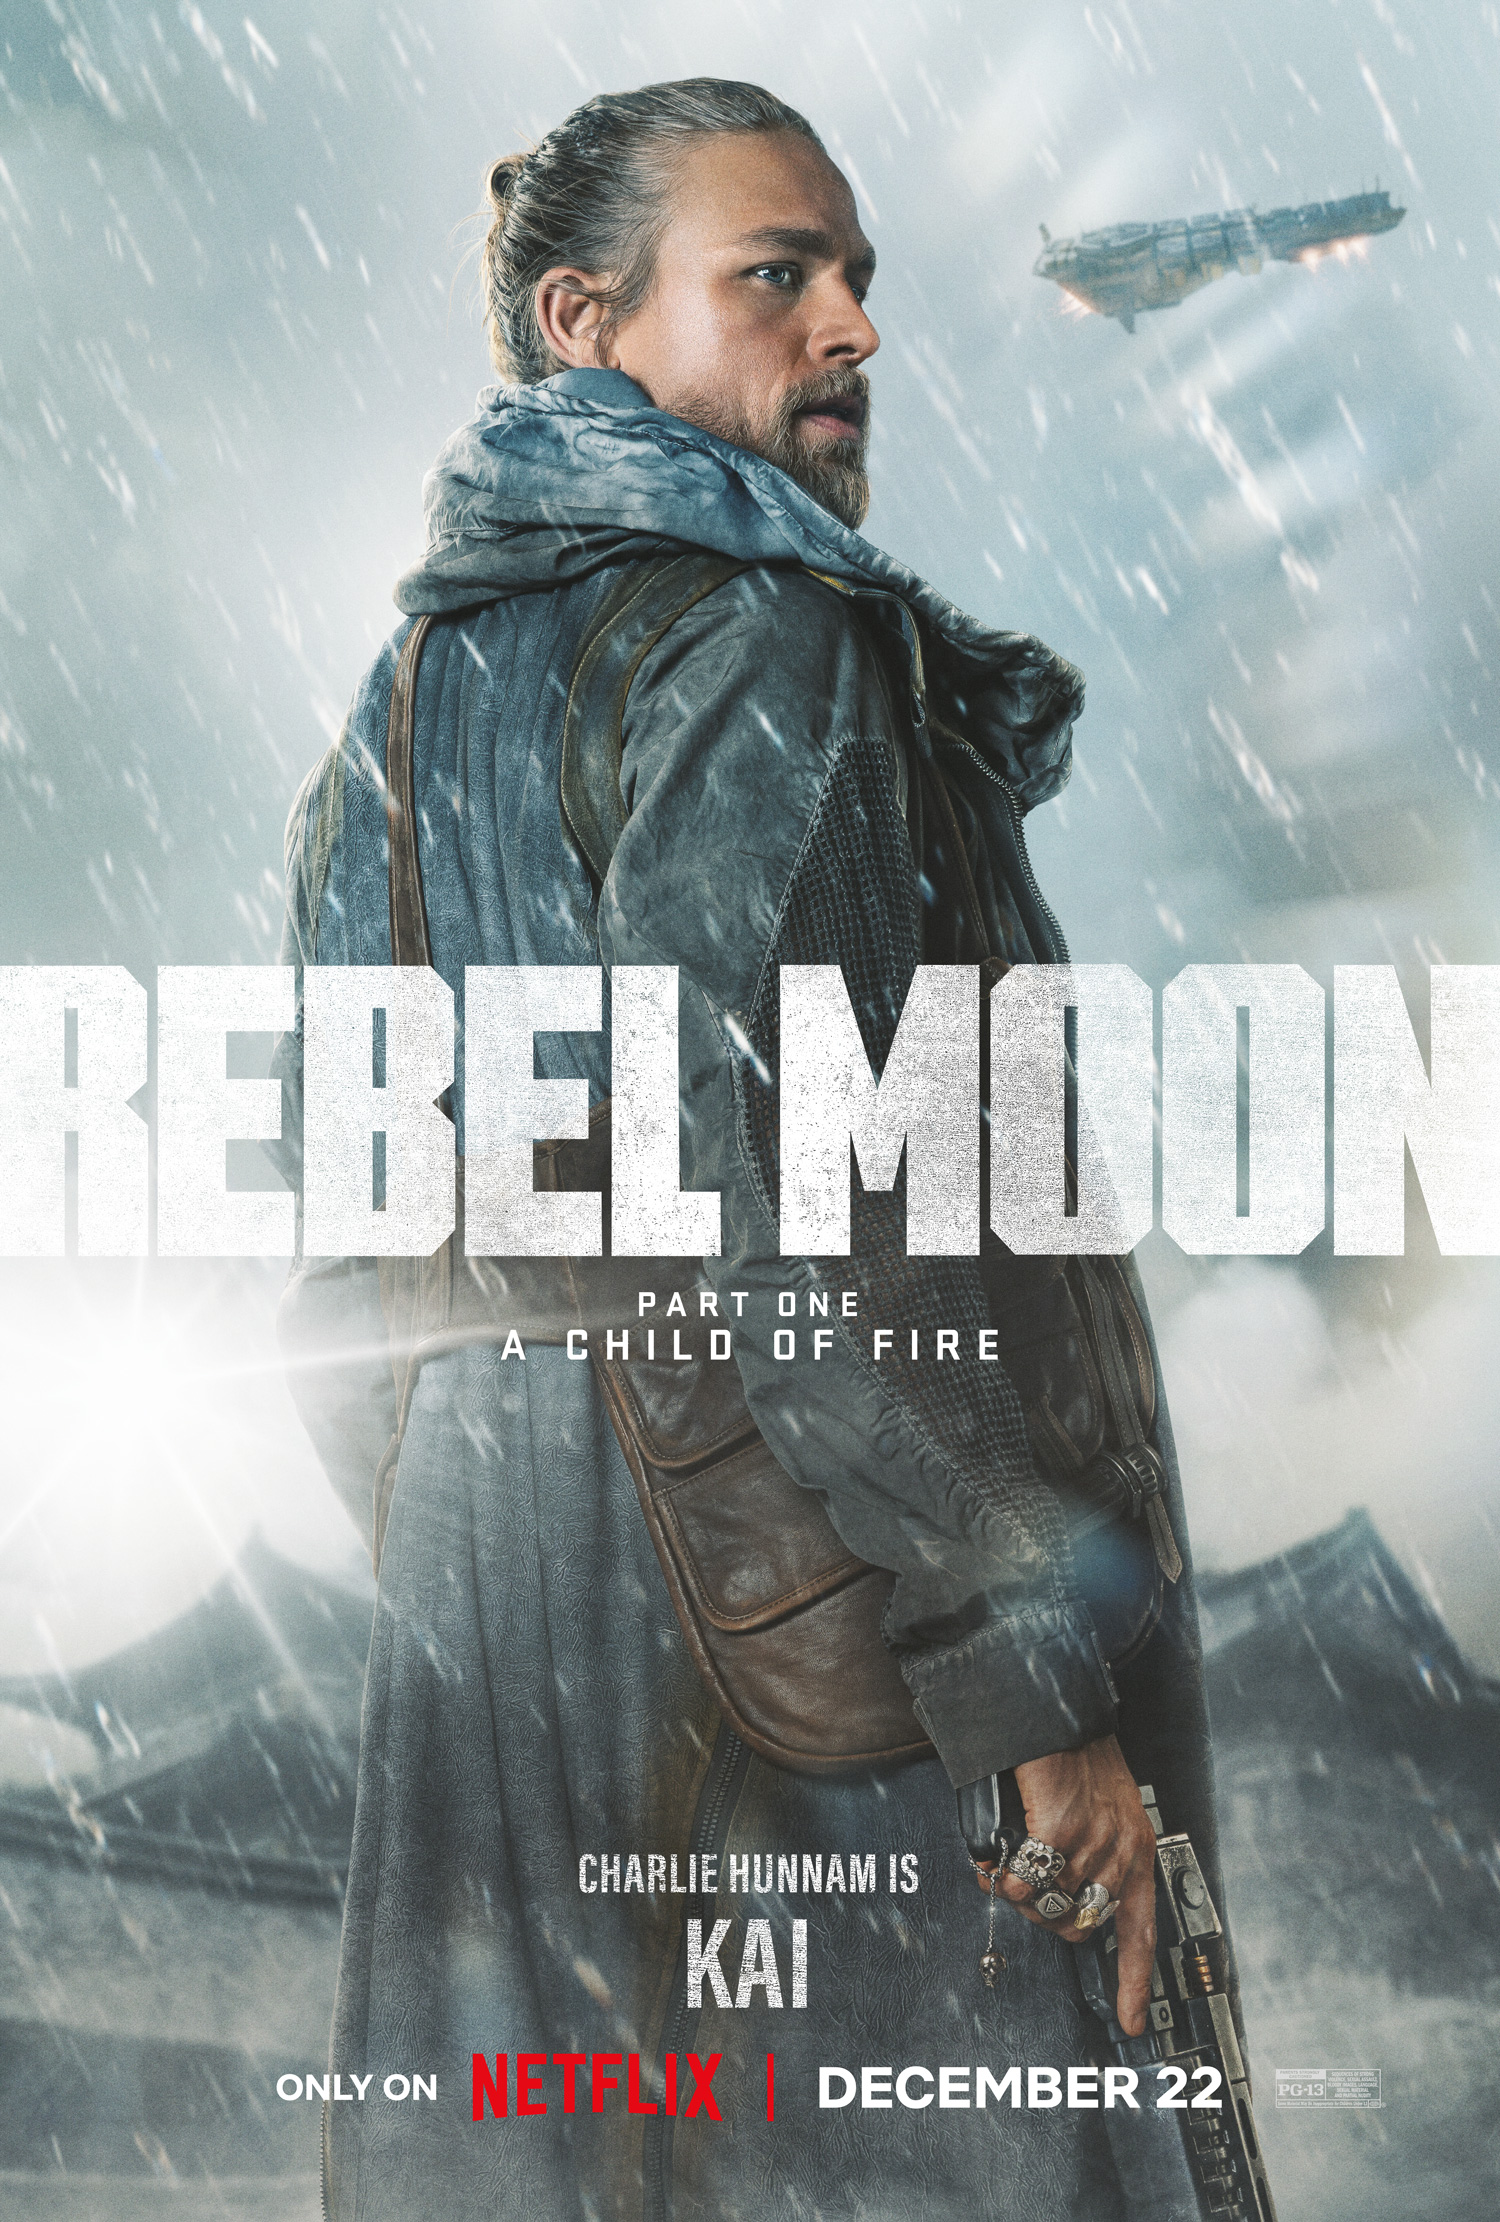 IMDB Lists a Theatrical Release Date for Rebel Moon of Friday, December 15,  2023 : r/SnyderCut